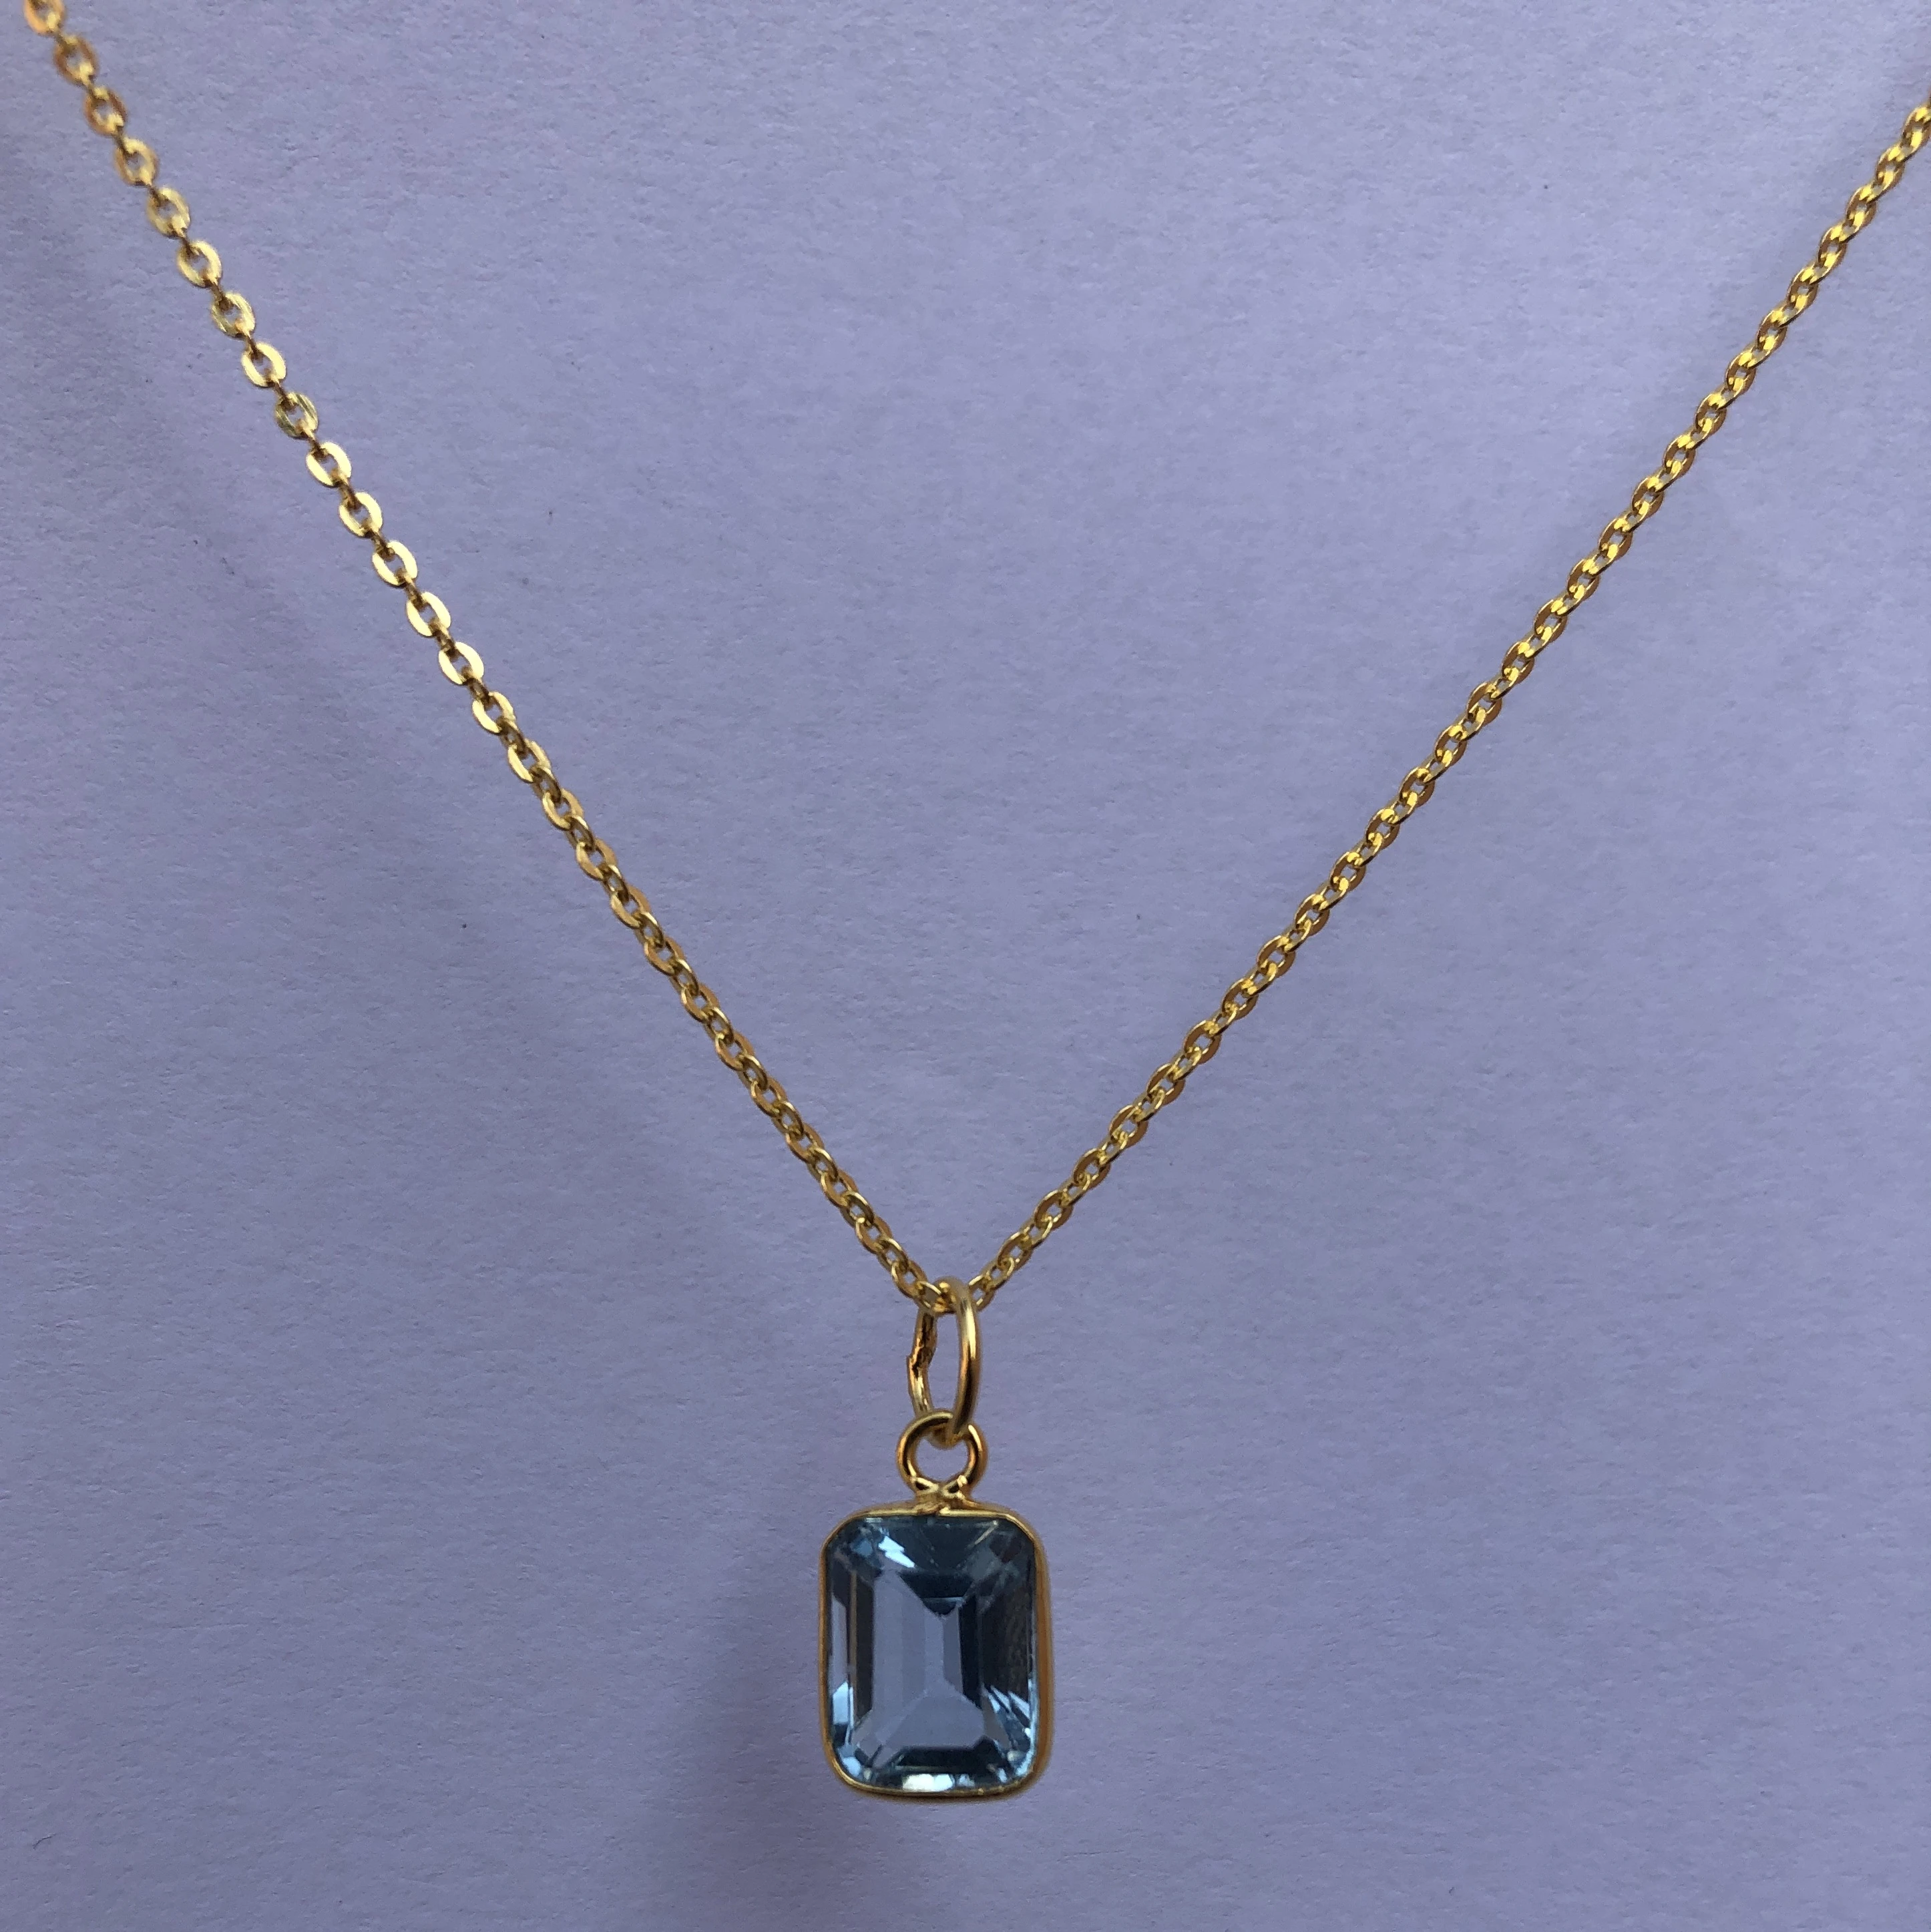 14k Solid Gold Jewelry Natural Sky Blue Topaz Gemstone Chain Pendant - Stone Very Small Shop Online at Wholesale Price